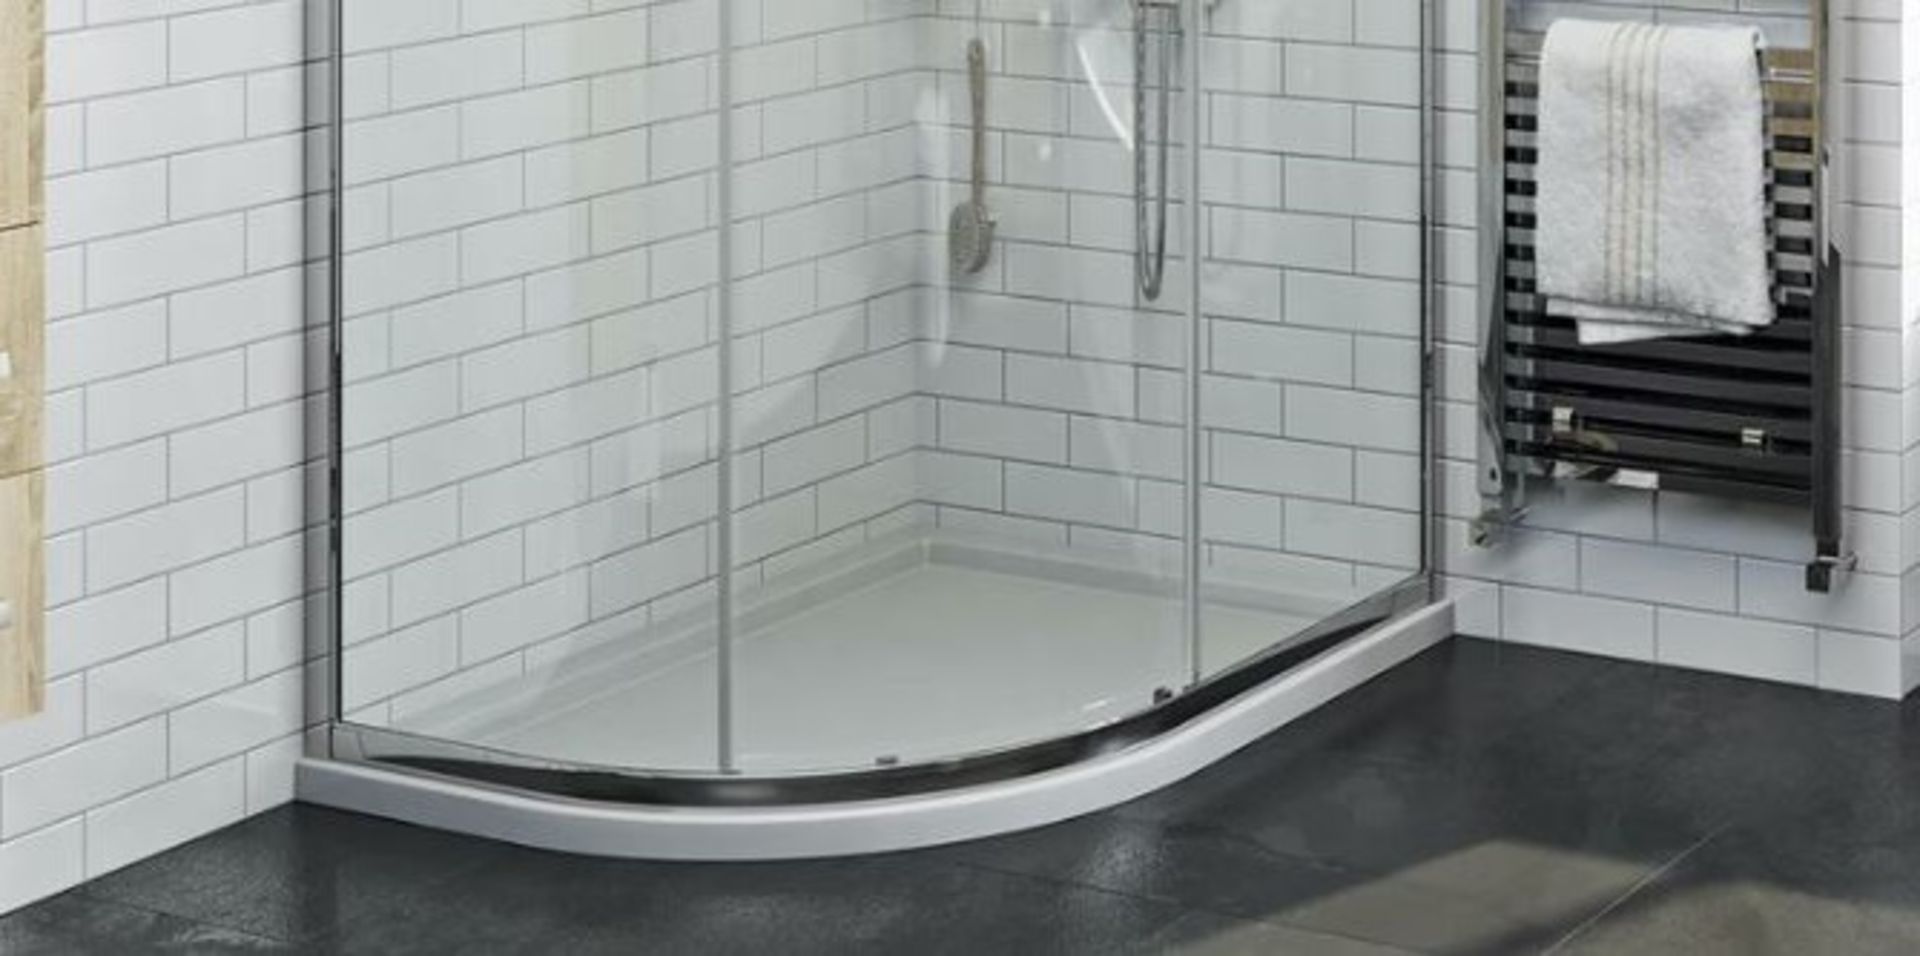 1200 x 800mm Quadrant Stone Shower Tray. Appears New Unused In Factory Wrap.